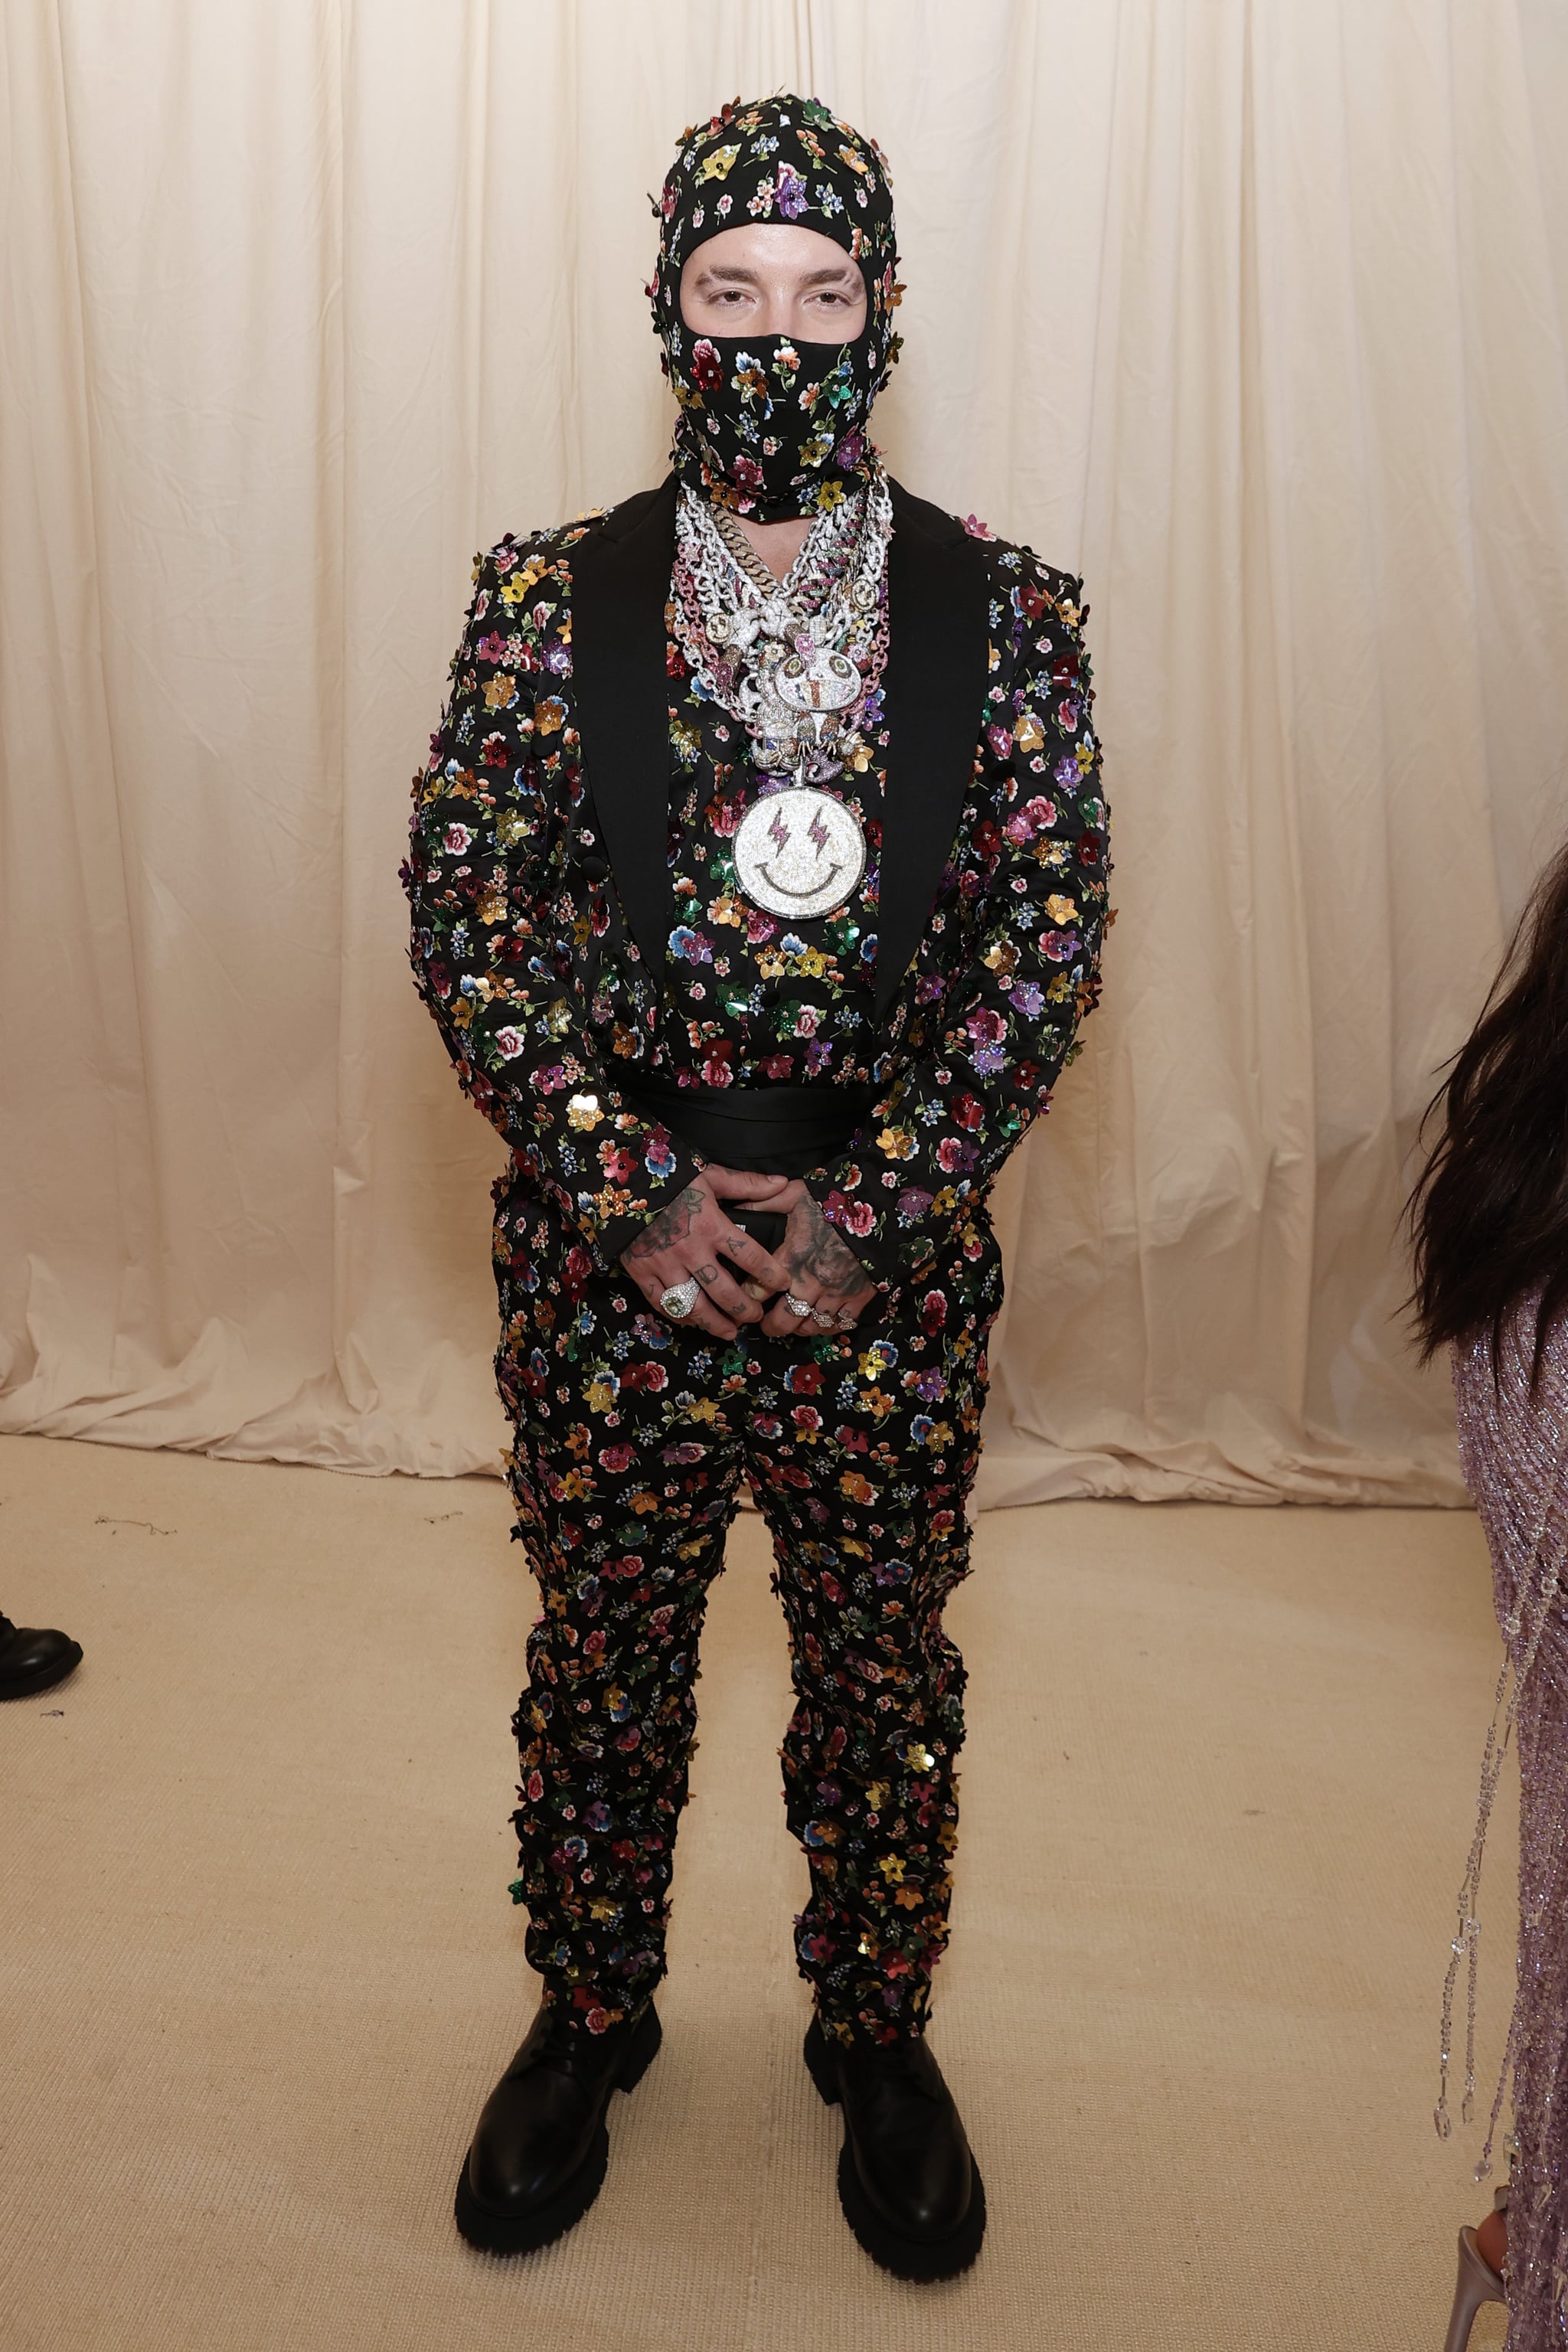 NEW YORK, NEW YORK - SEPTEMBER 13: J Balvin attends The 2021 Met Gala Celebrating In America: A Lexicon Of Fashion at Metropolitan Museum of Art on September 13, 2021 in New York City. (Photo by Arturo Holmes/MG21/Getty Images)